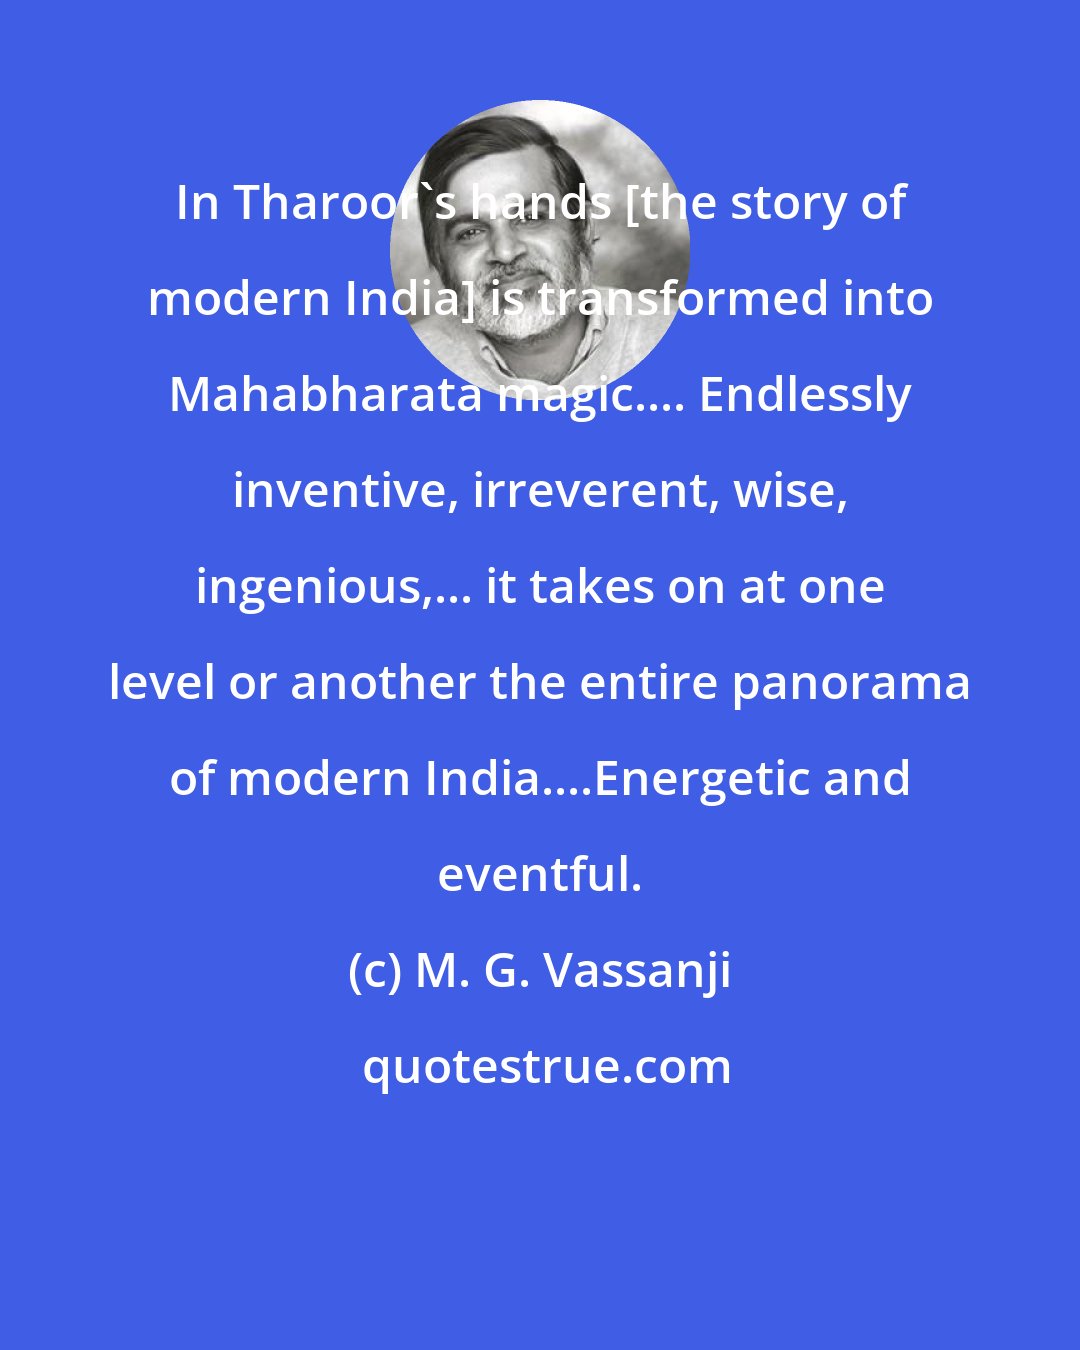 M. G. Vassanji: In Tharoor's hands [the story of modern India] is transformed into Mahabharata magic.... Endlessly inventive, irreverent, wise, ingenious,... it takes on at one level or another the entire panorama of modern India....Energetic and eventful.